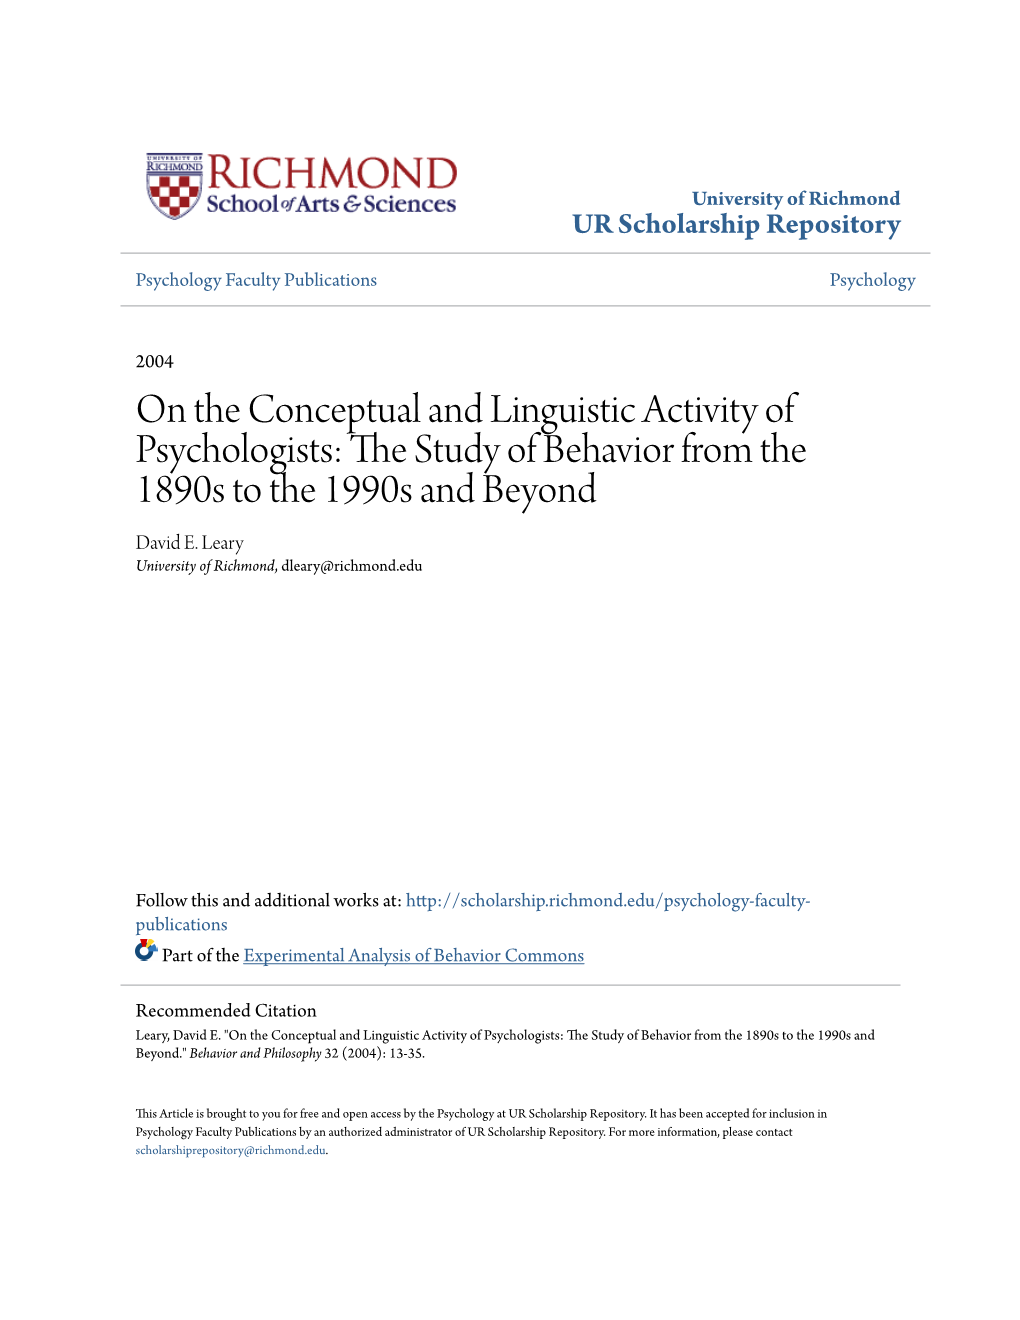 On the Conceptual and Linguistic Activity of Psychologists: the Tuds Y of Behavior from the 1890S to the 1990S and Beyond David E